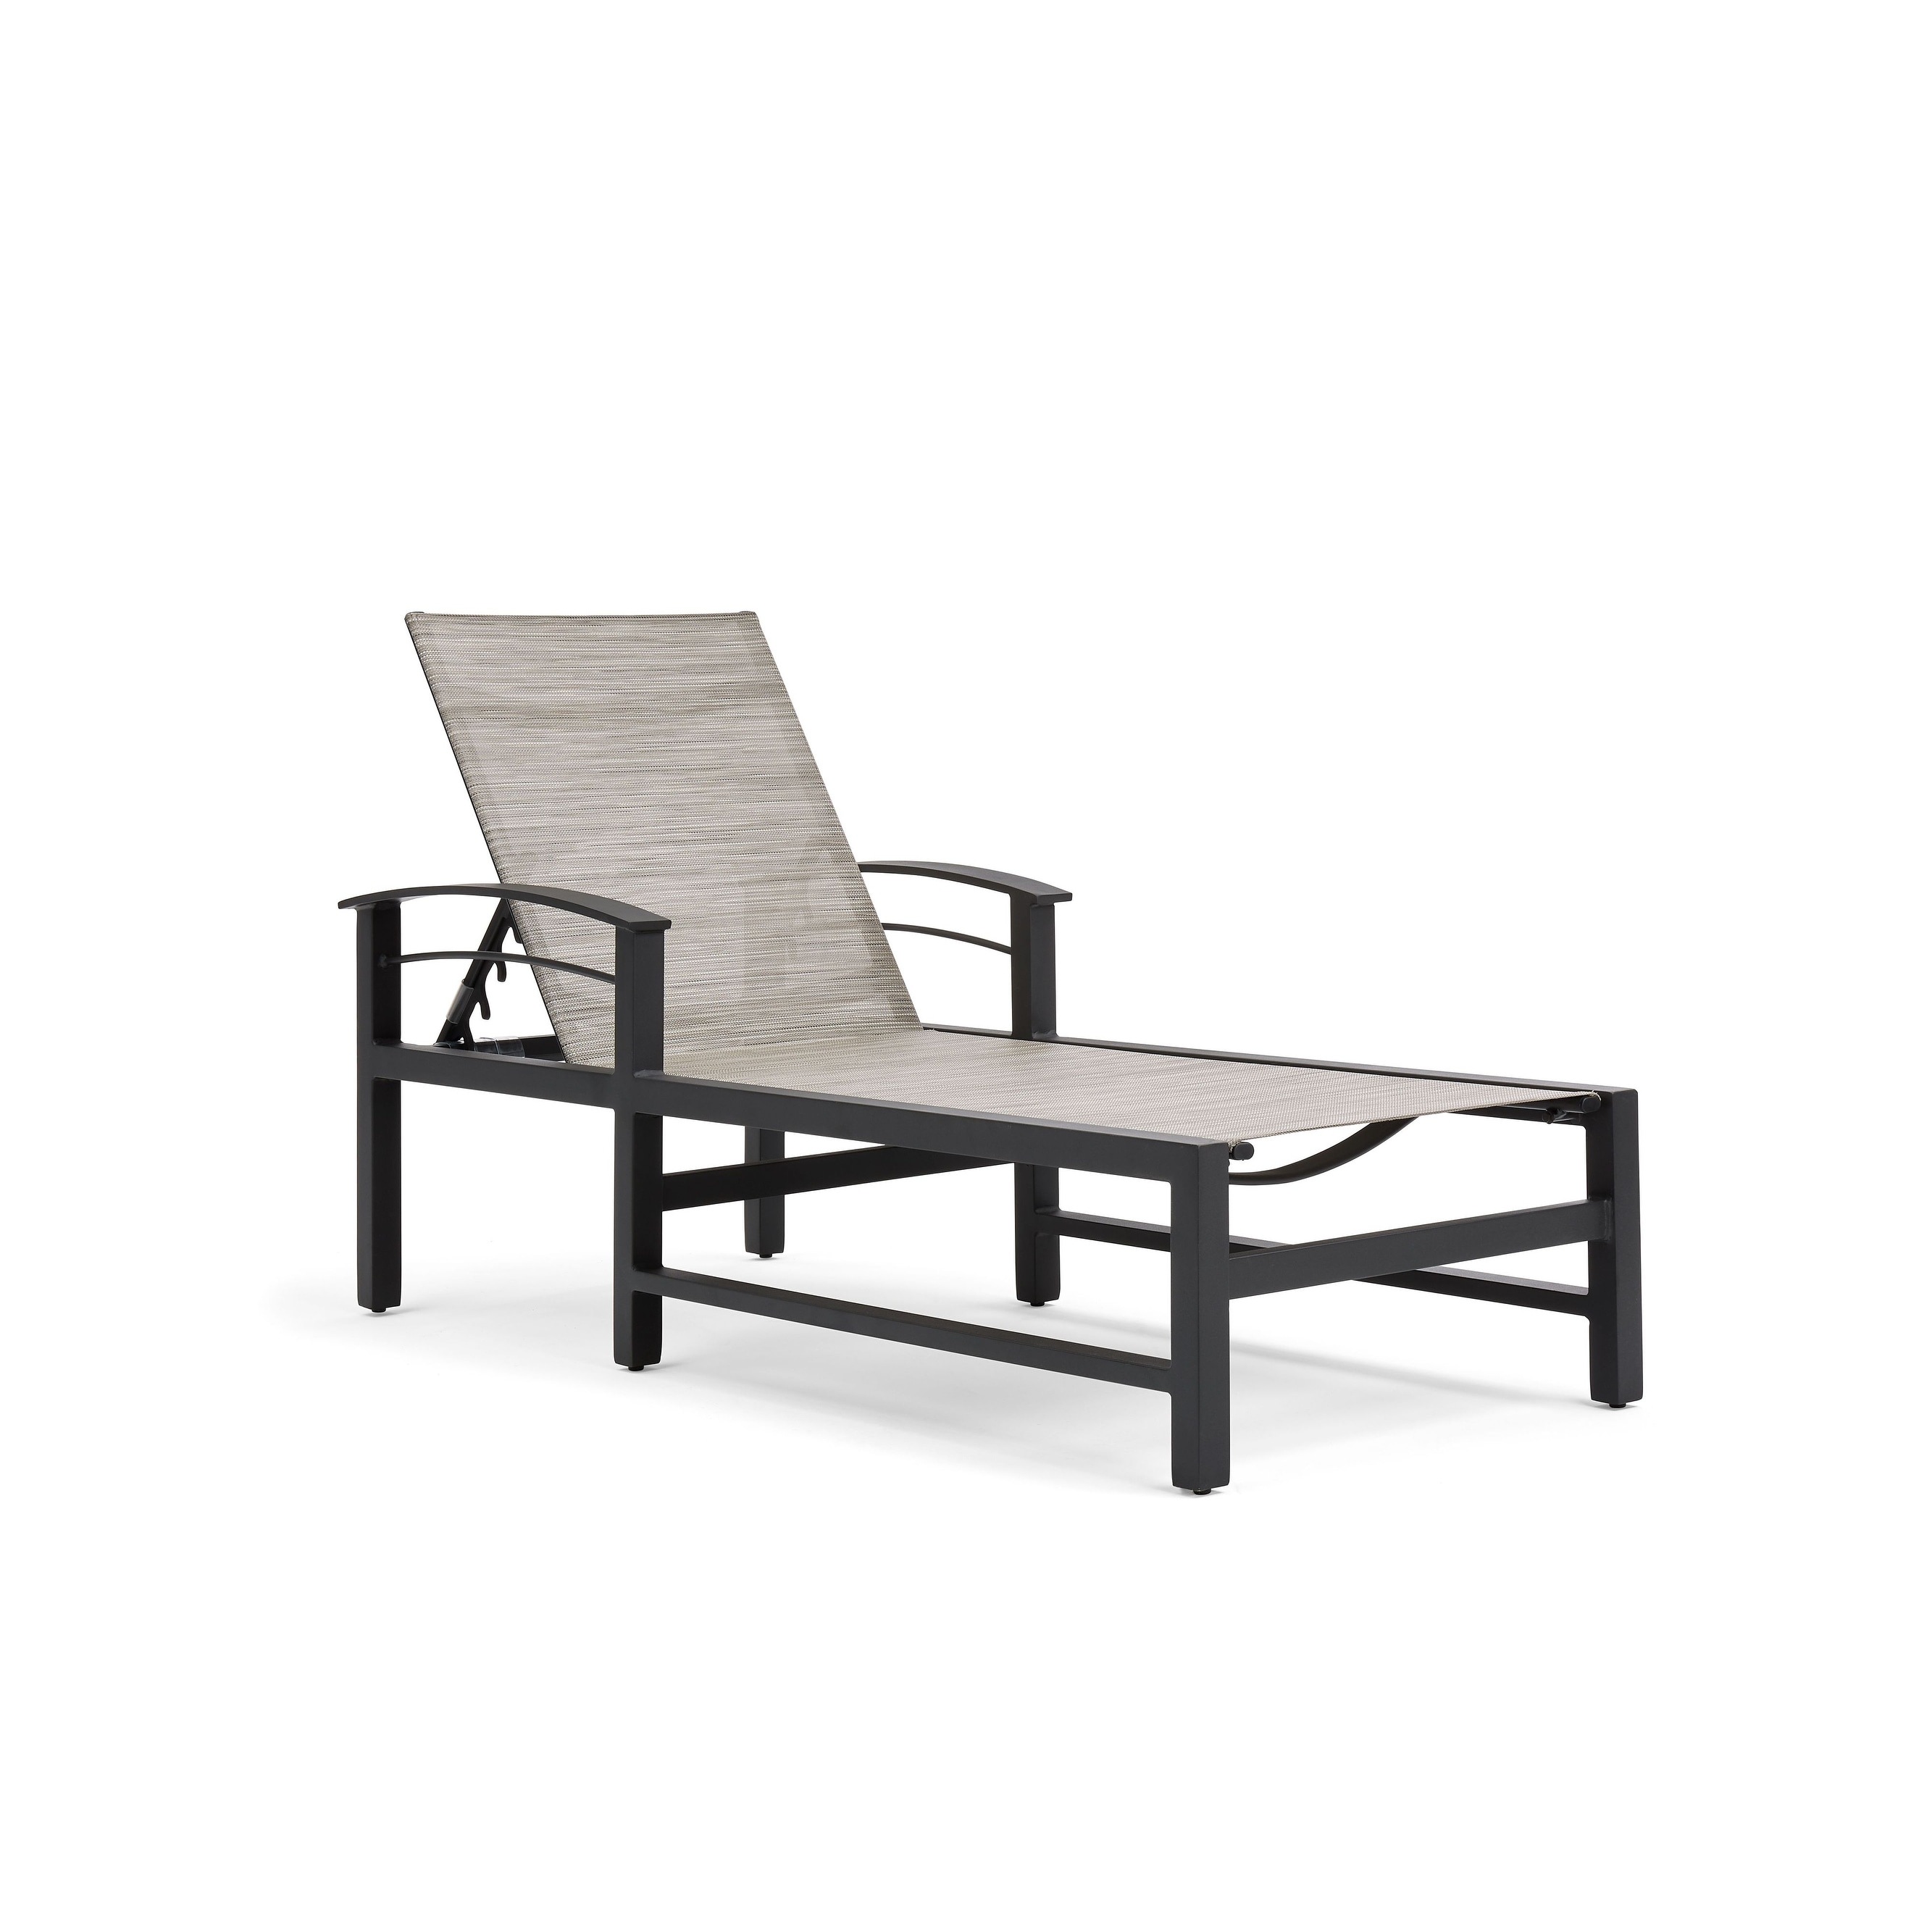 Stanford Sling Adjustable Chaise